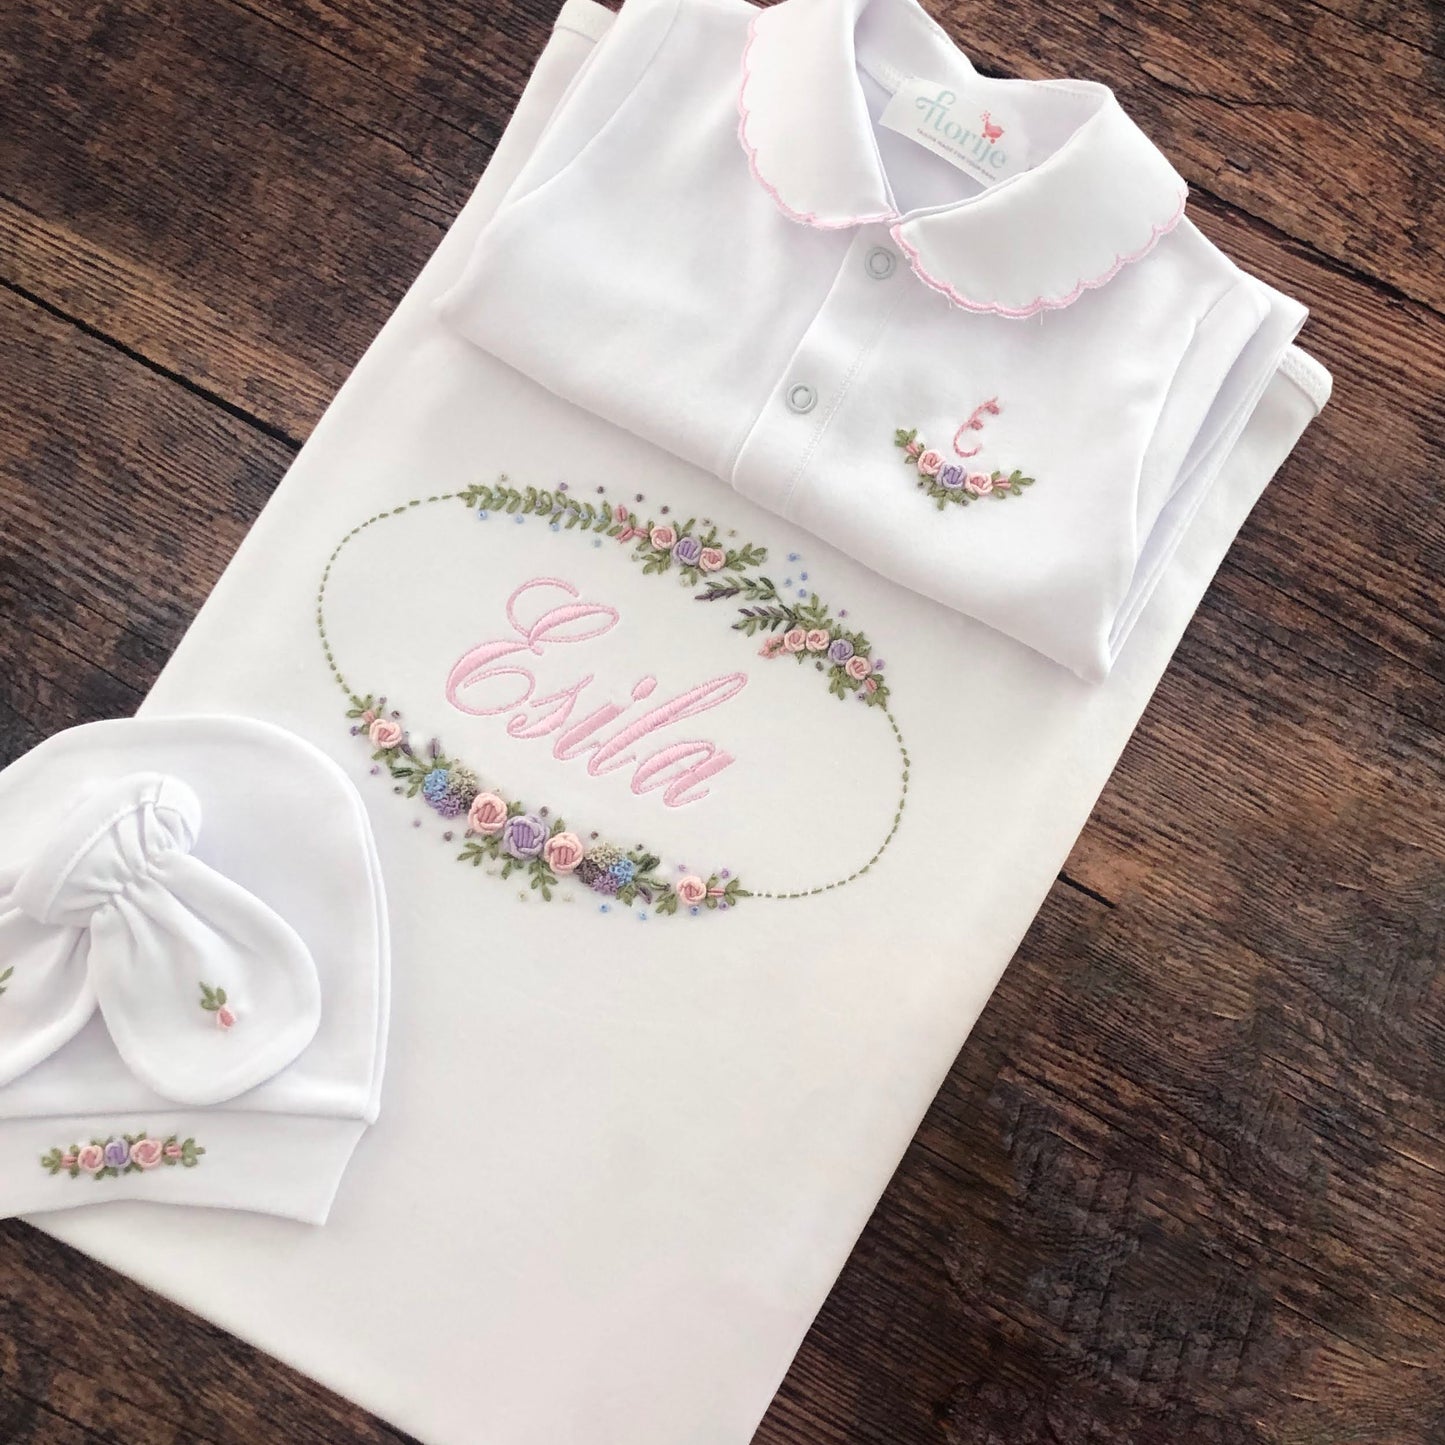 Personalized Hand Embroidery Clothing Set (0-3 Months) (4 Pcs, Sleepsuit, Blanket, Beanie, Mittens) | Flower Bloom